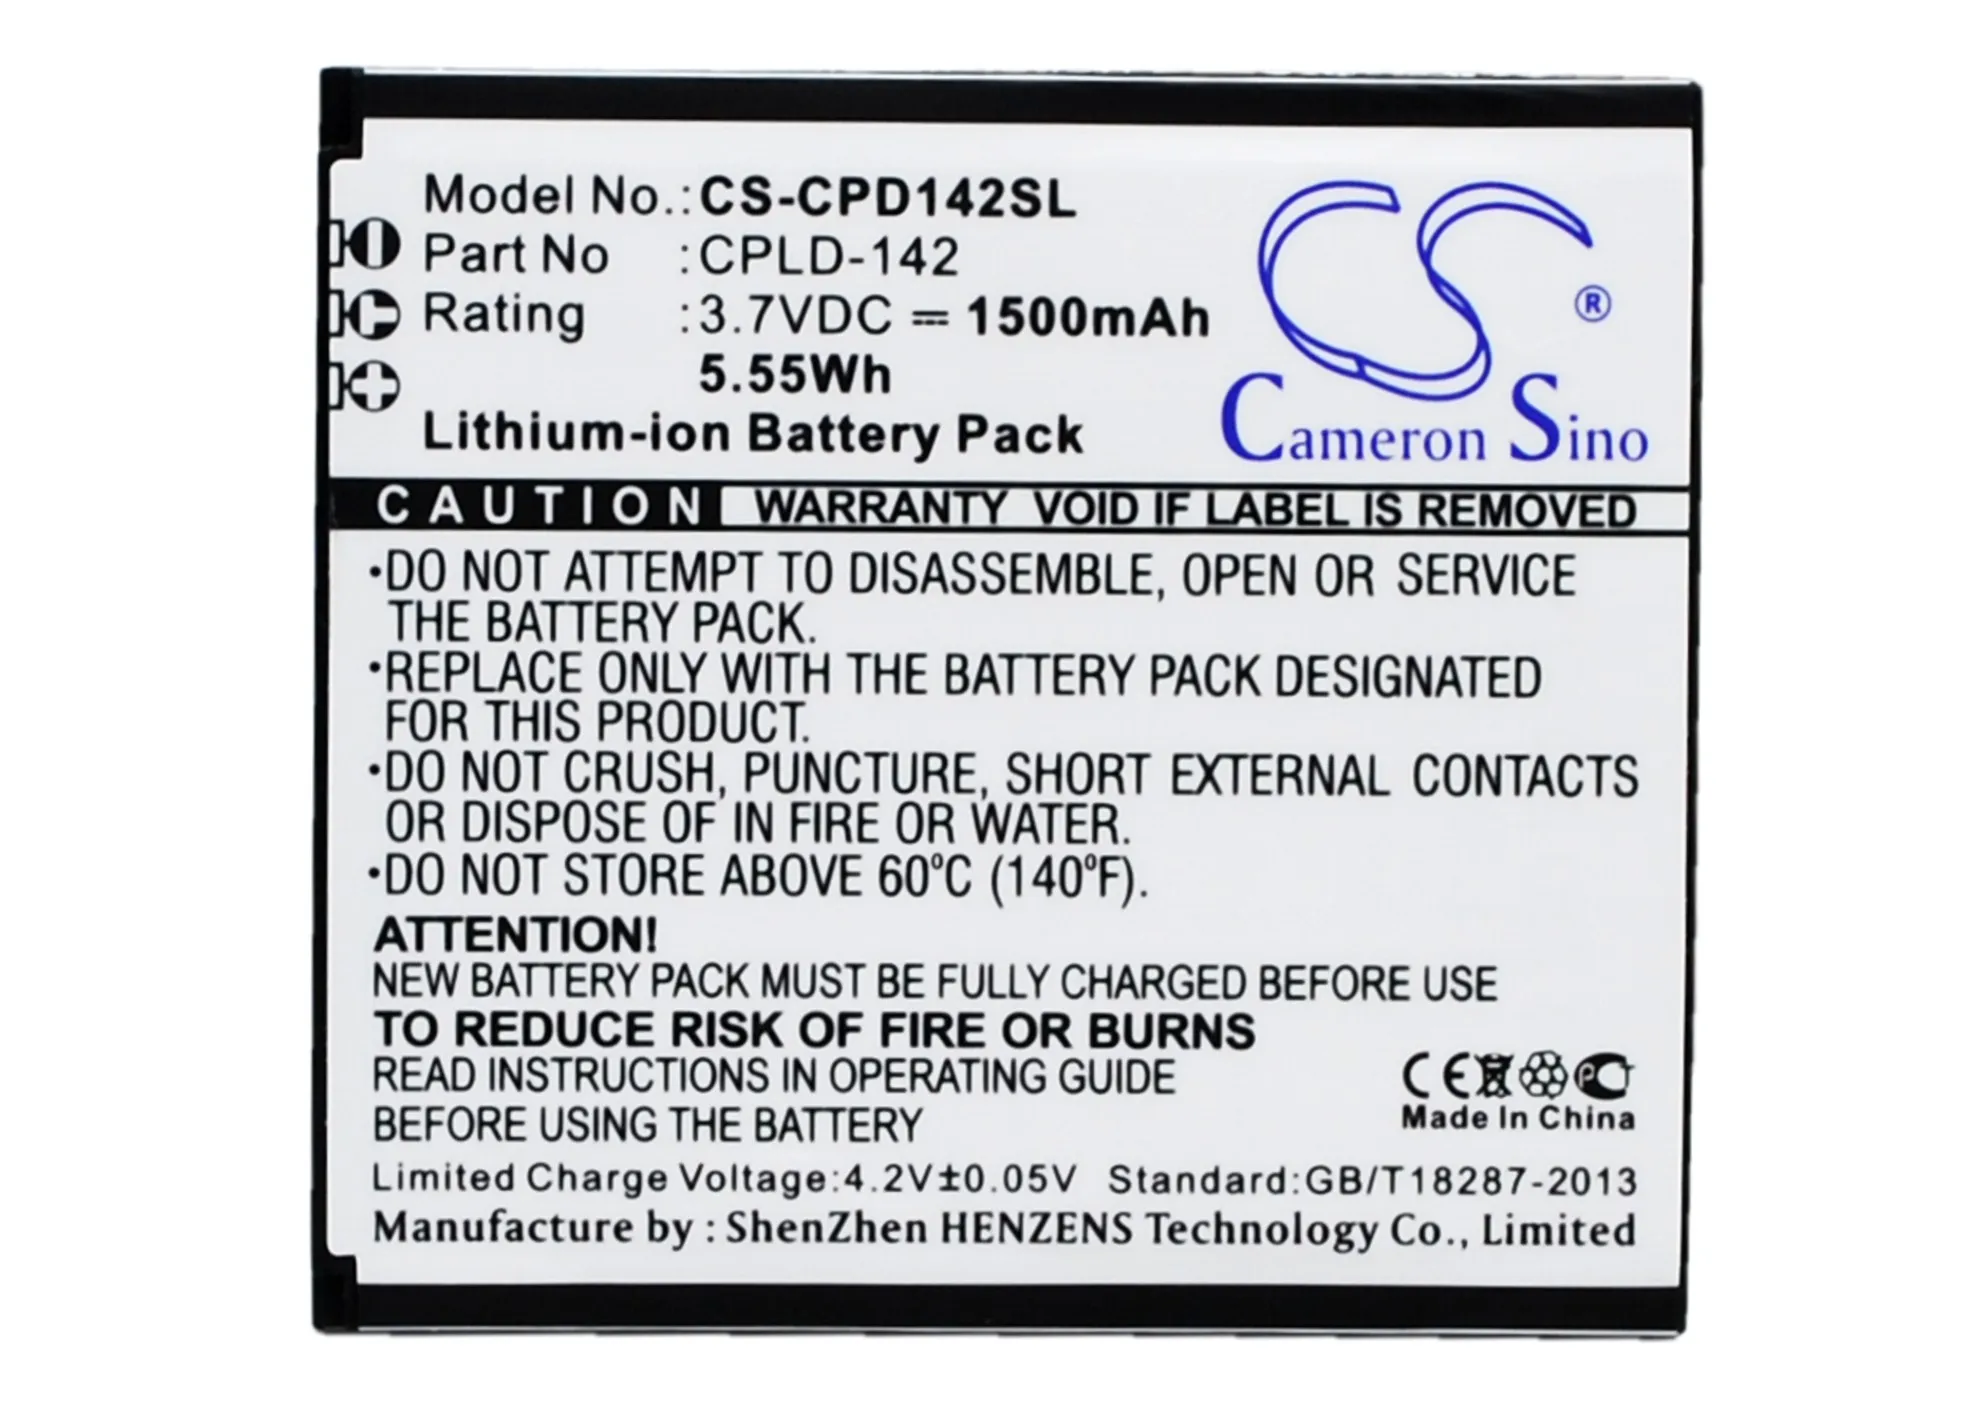 

CS 1500mAh / 5.55Wh battery for Coolpad 5313S CPLD-142